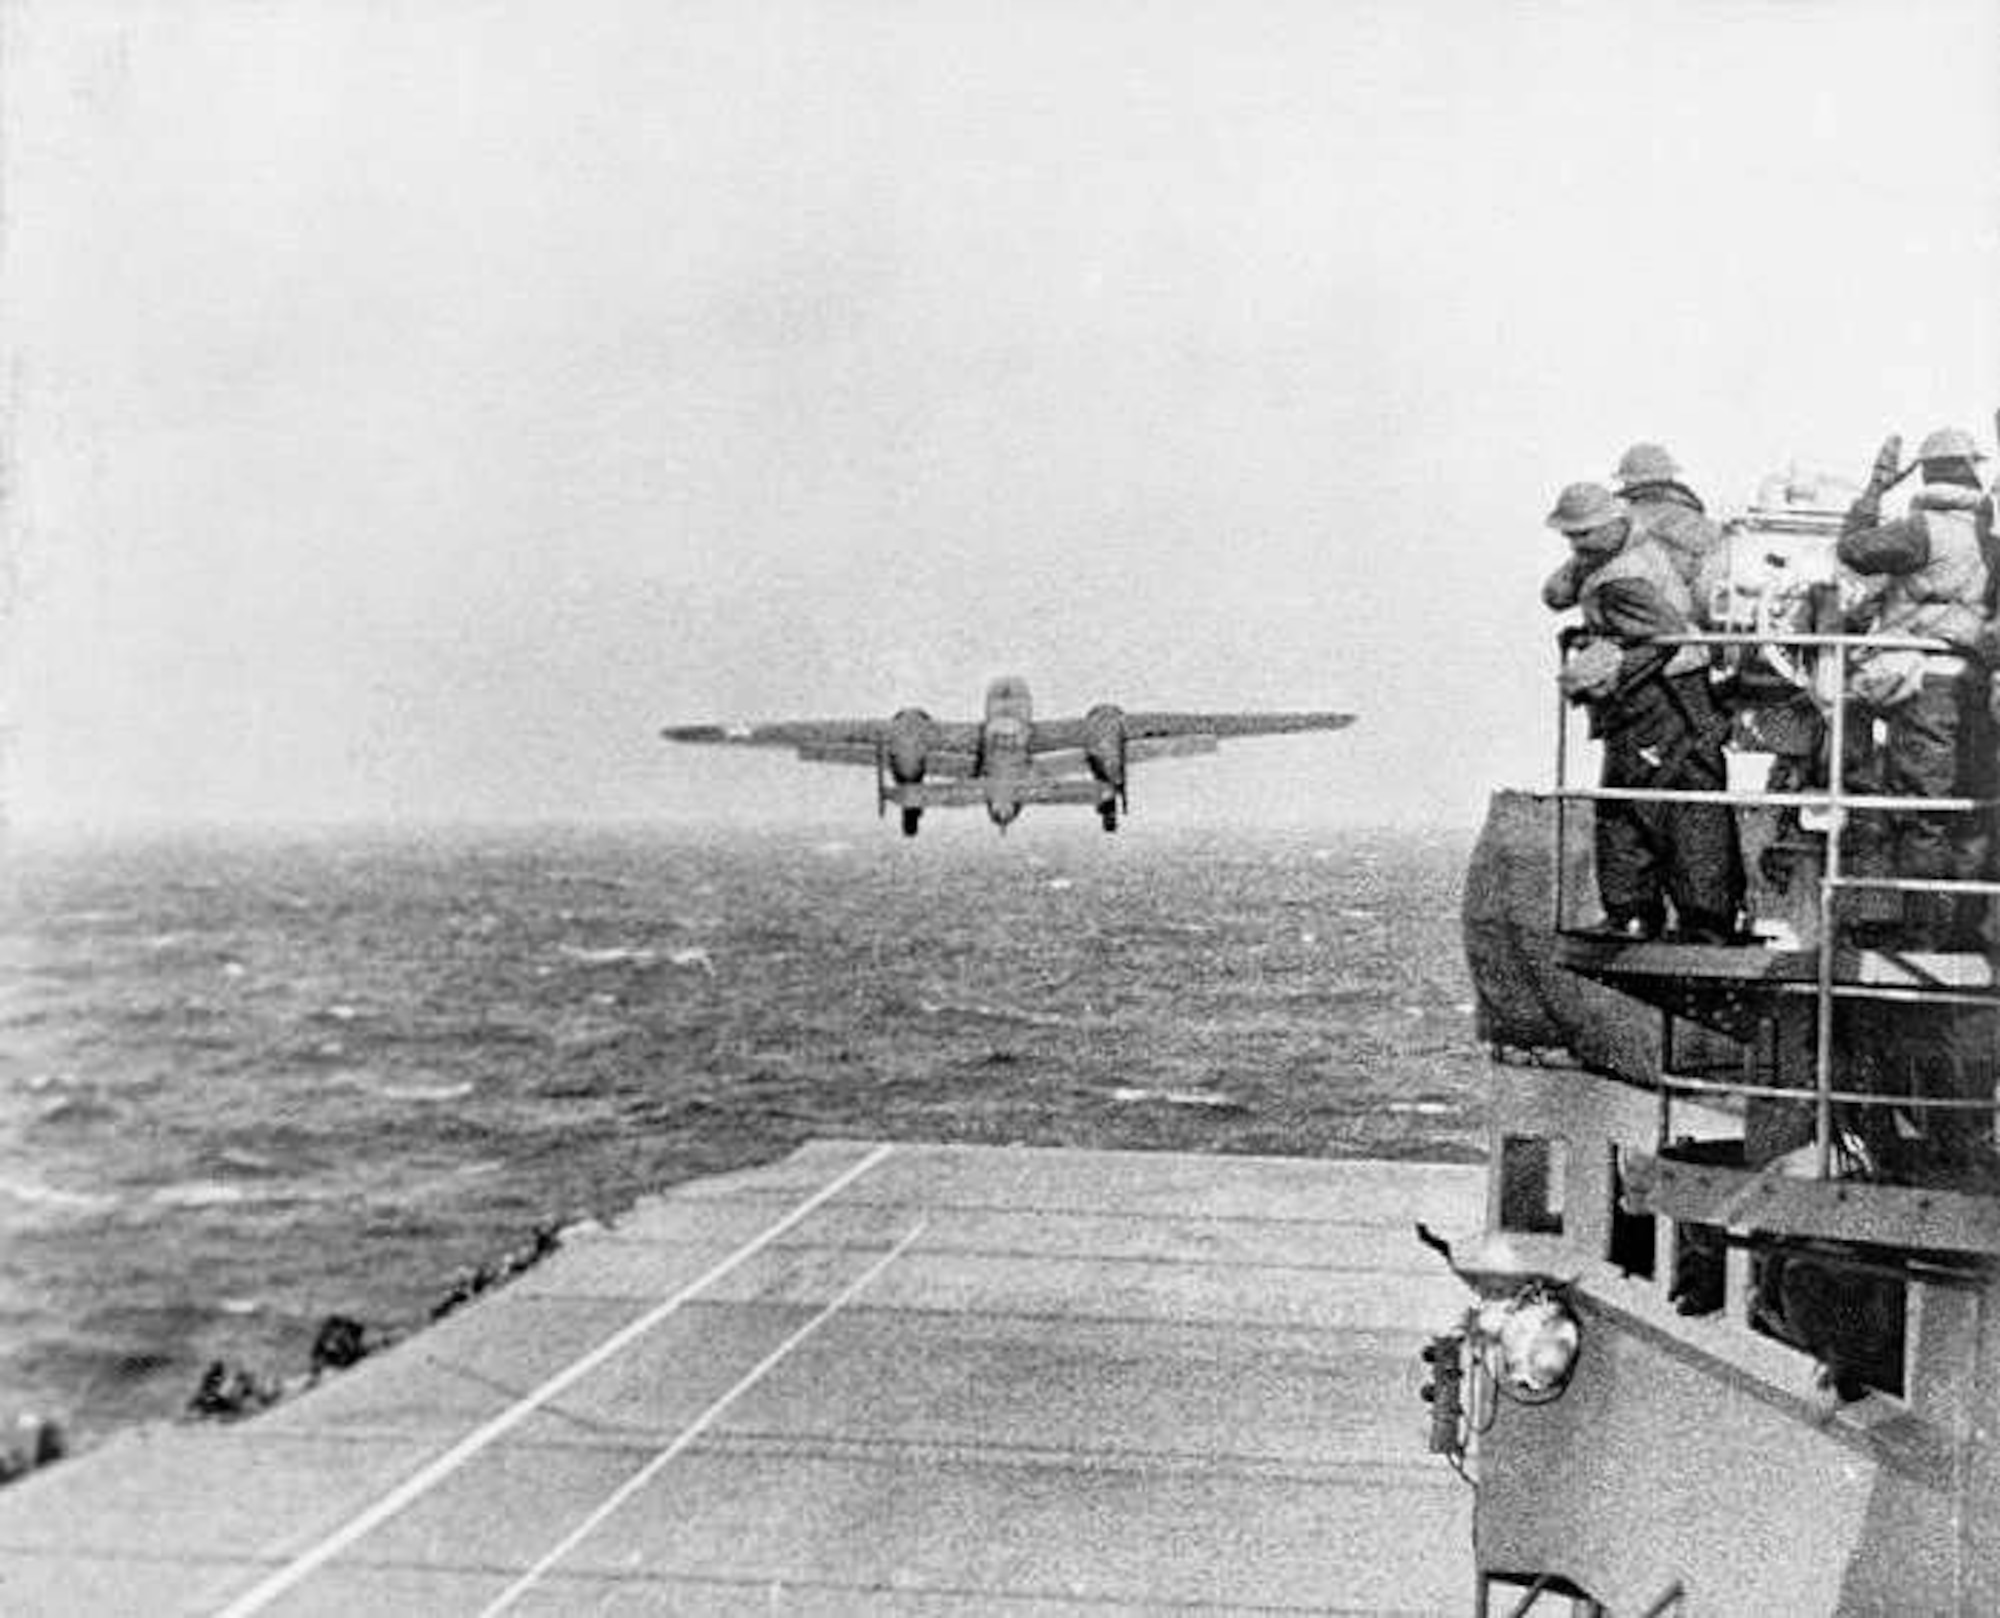 A B-25 Mitchell takes off from the USS Hornet in route to Japan during World War II in April 1942. The Doolittle Raiders were instrumental in retaliatory strikes after Japan attacked Pearl Harbor December 7, 1941. In their honor, the new B-21 bomber has been named the Raider. (Courtesy photo)